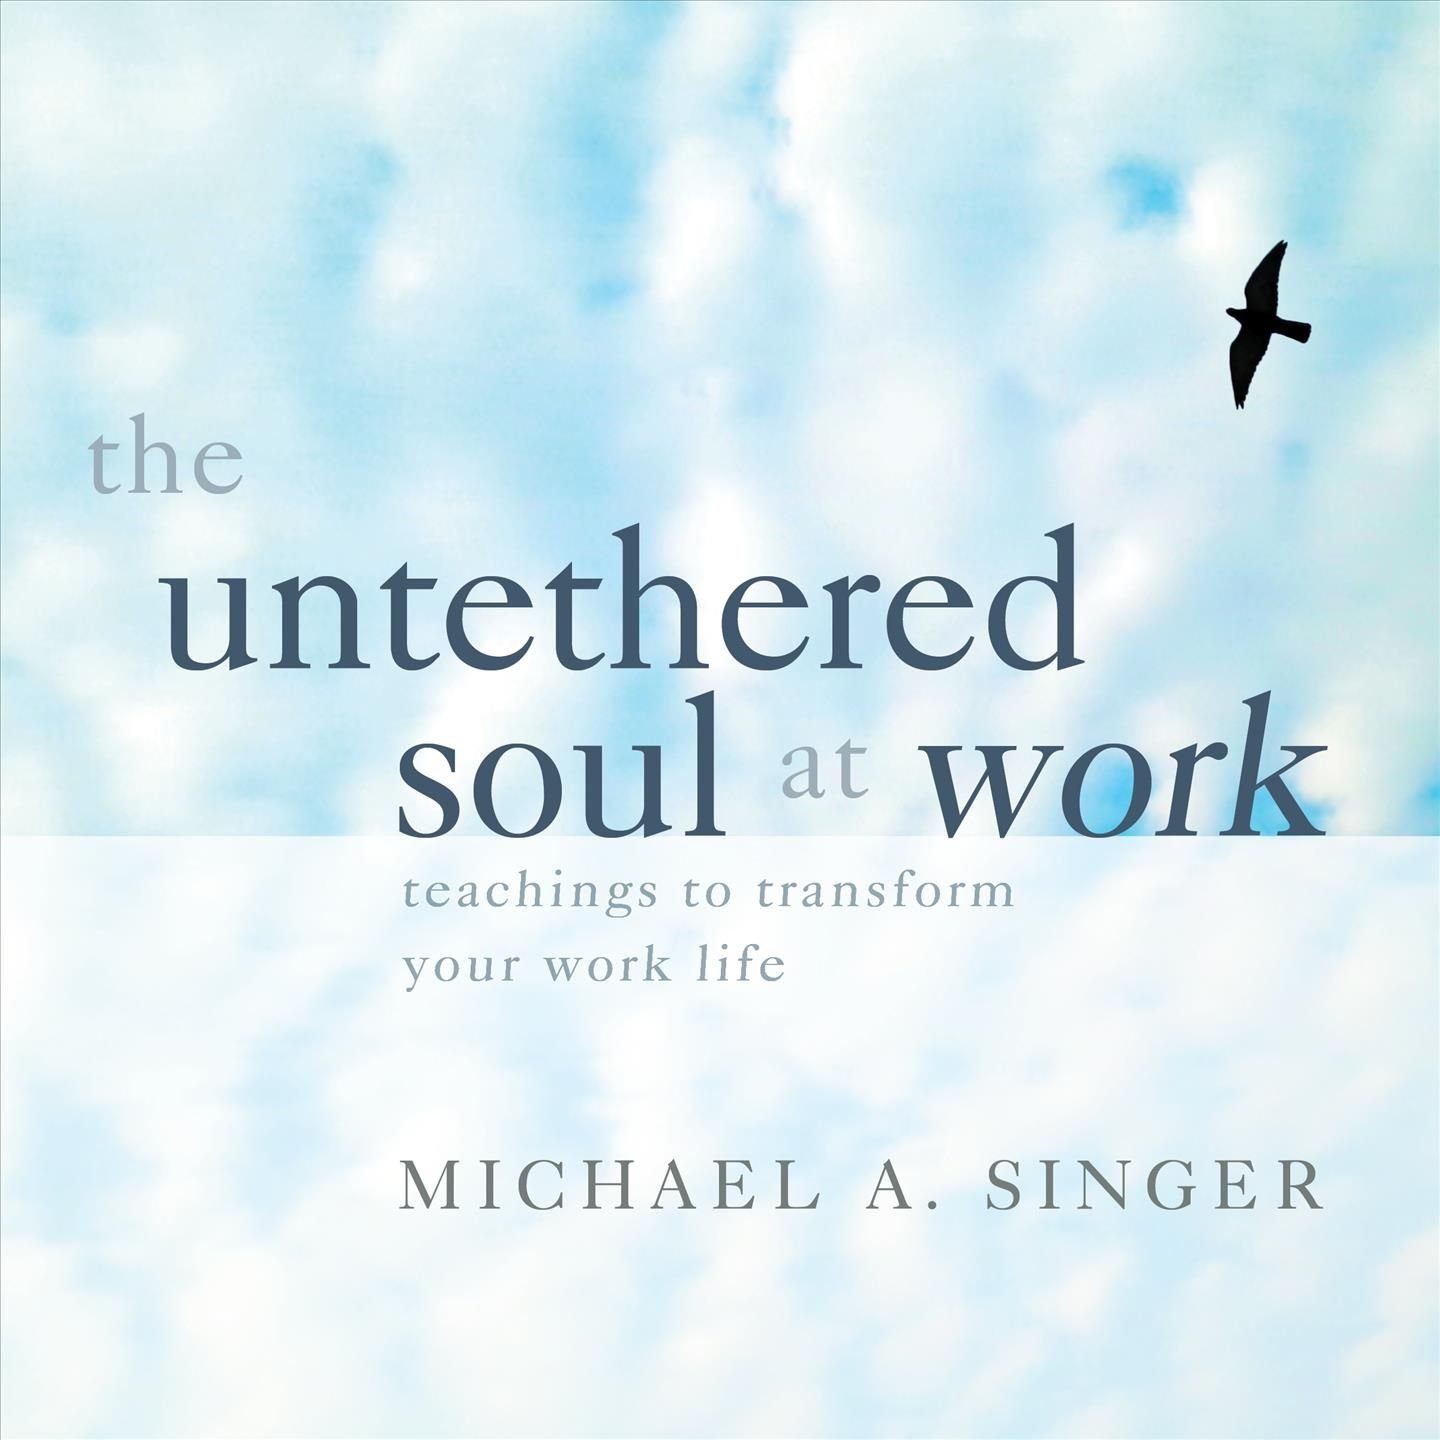 the untethered soul